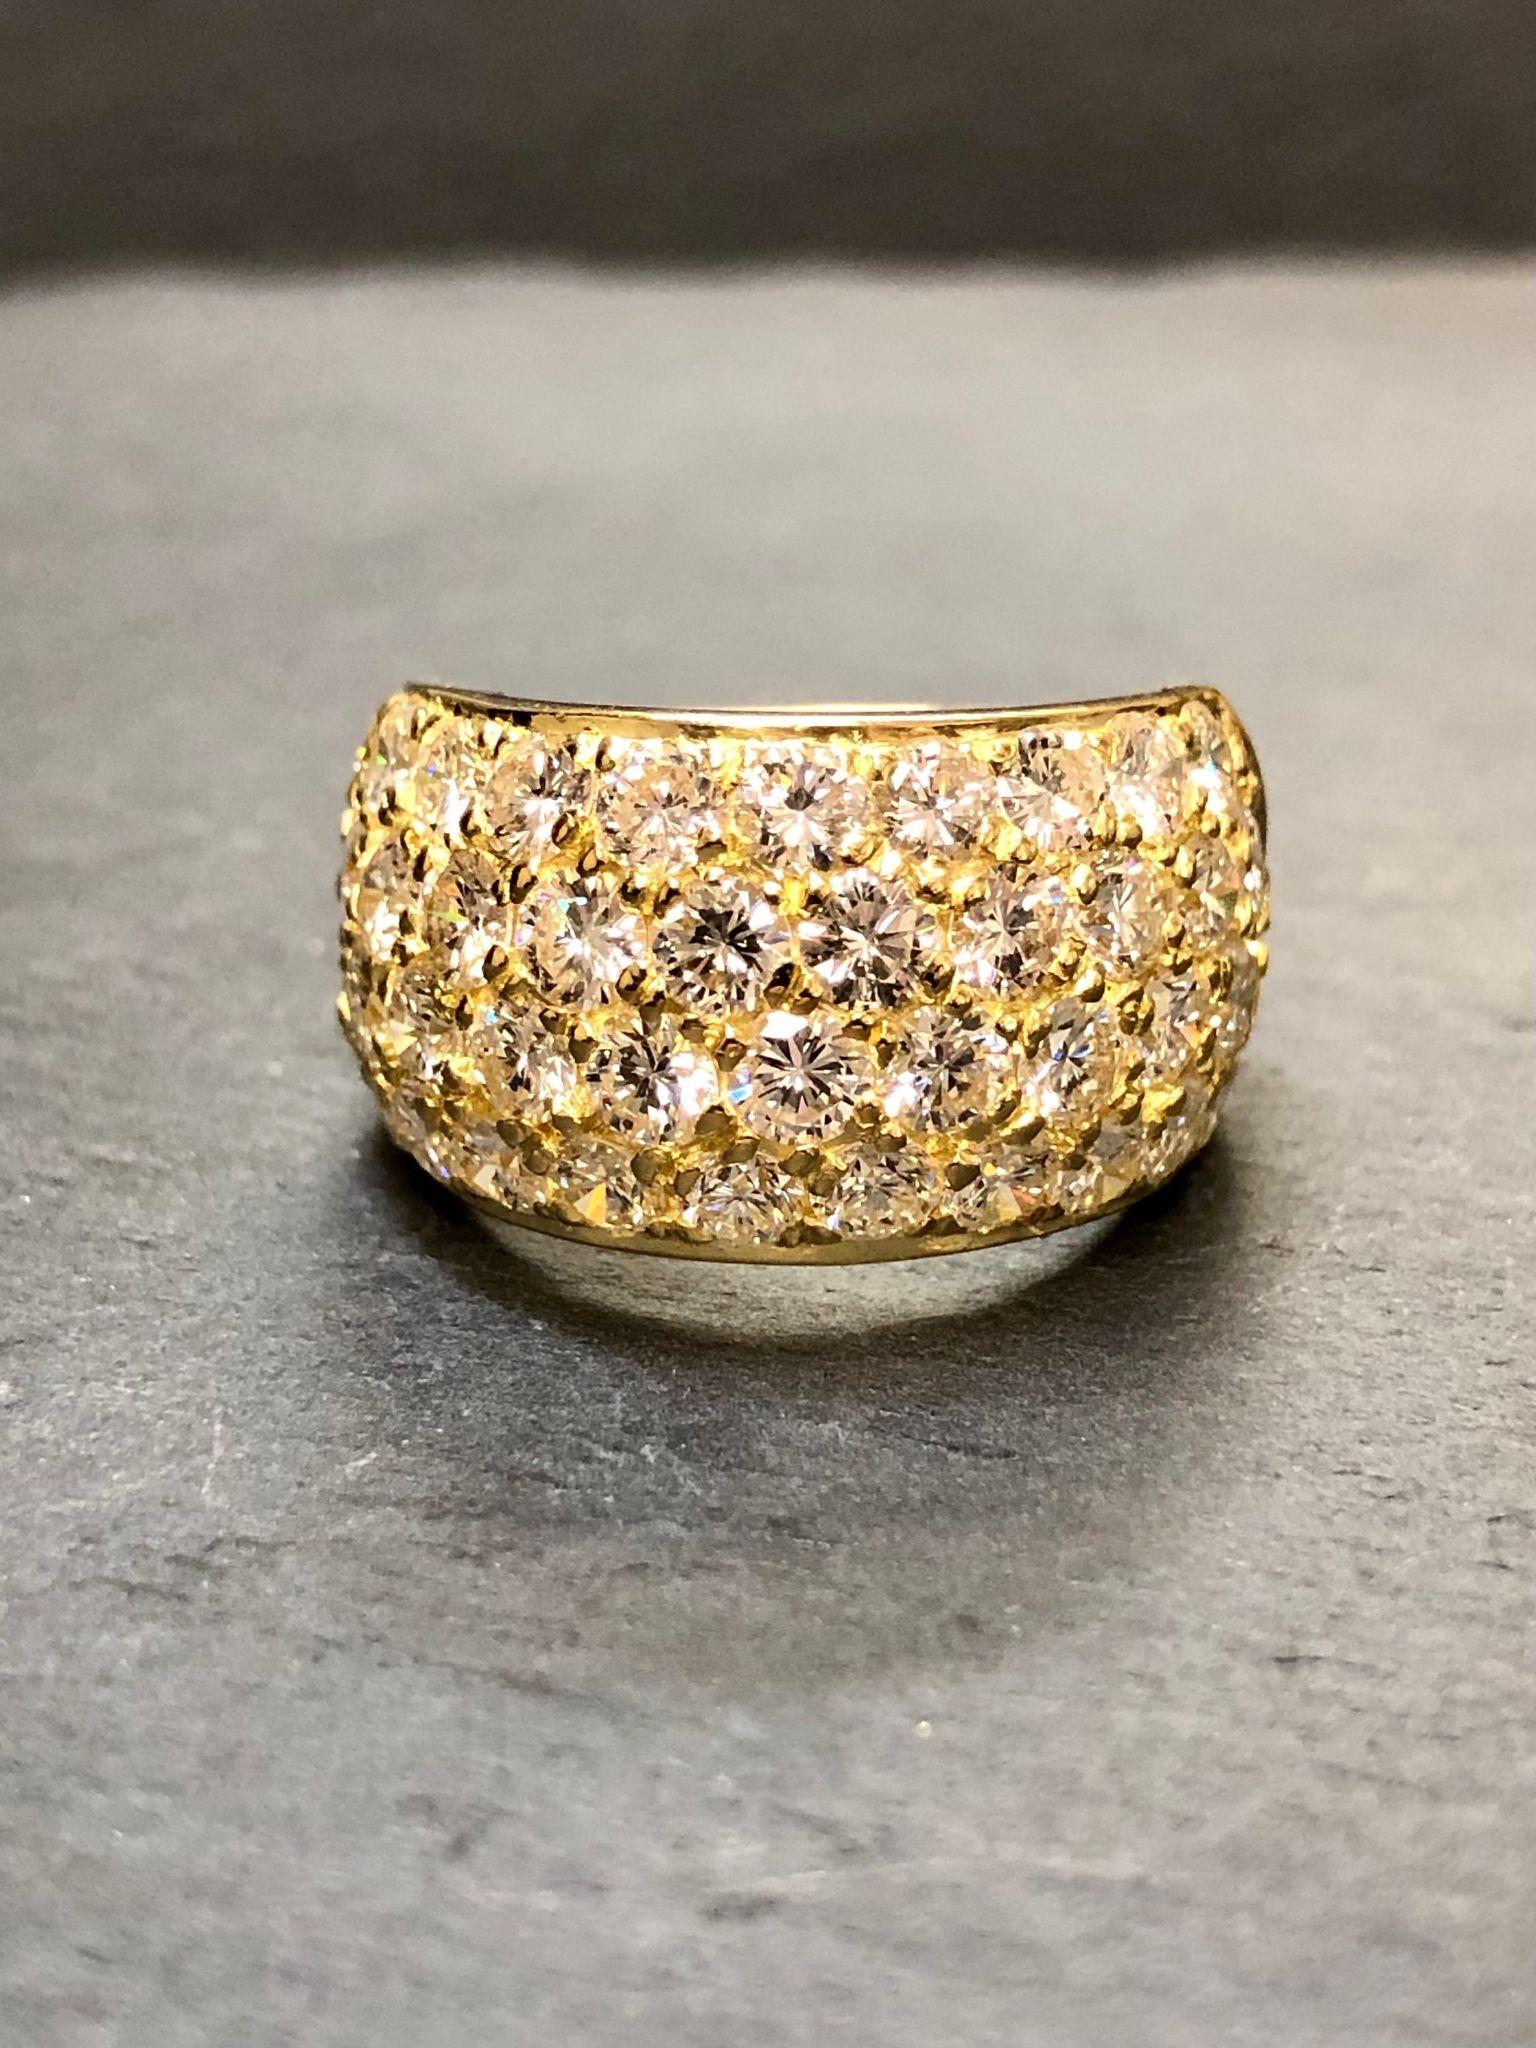 An extremely well done ring made in 18K yellow gold and set with perfectly matched, collection quality E-G color Vs1 clarity large diamonds with a total approximate weight of 4.65cttw. Notice the perfect azuring on the back as well. An incredible